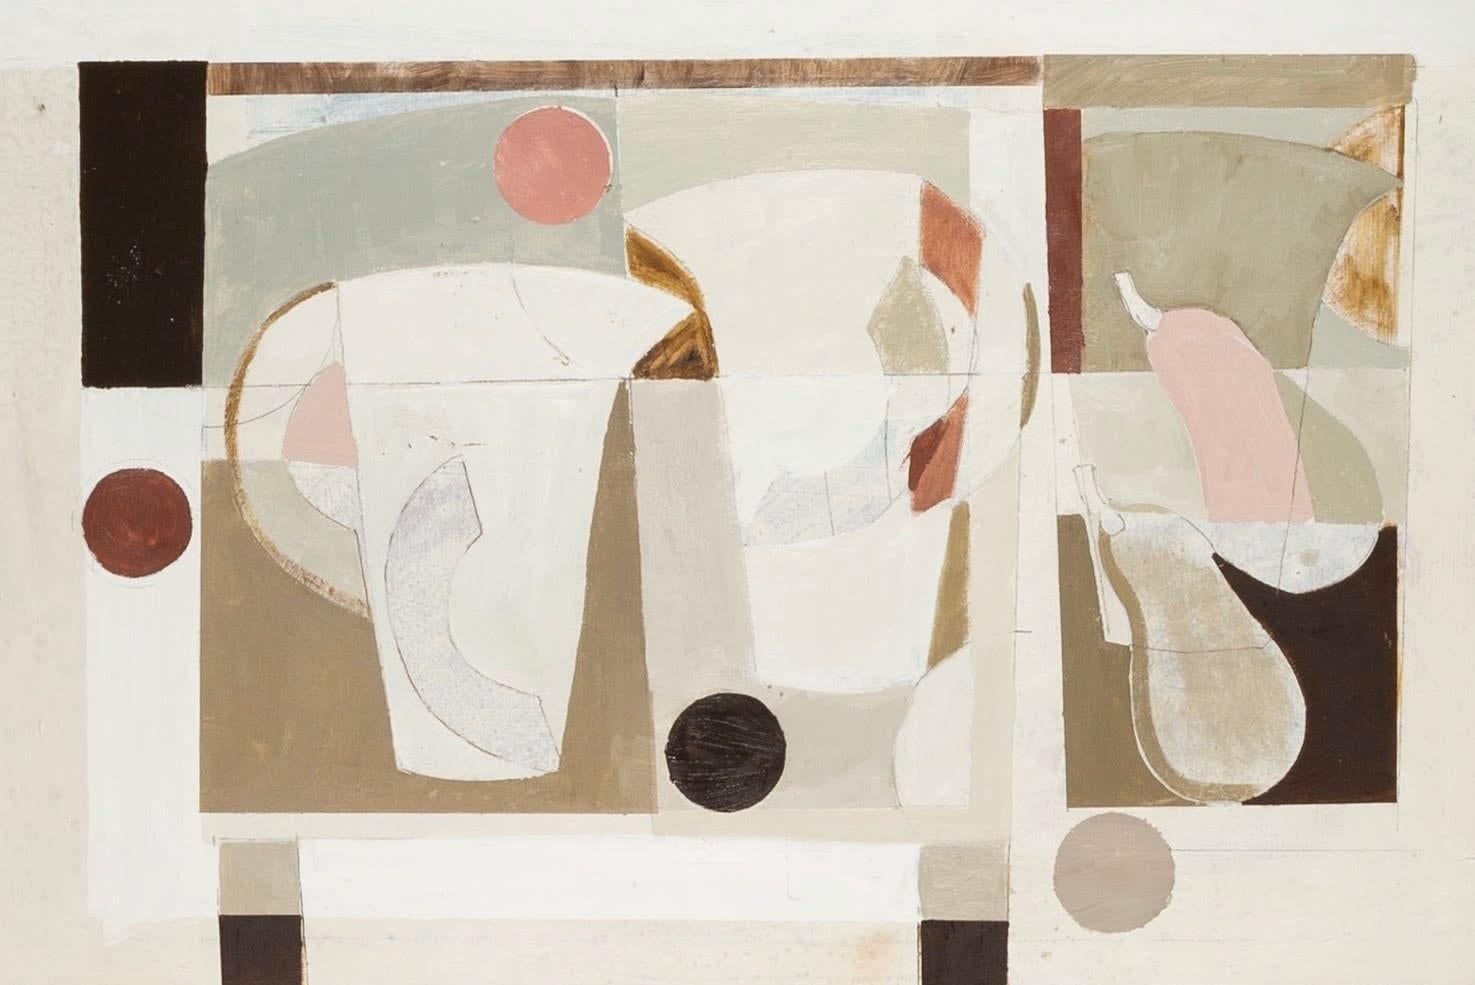 Still Life with Pears (Pink) Painting by Daisy Cook B. 1965, 2023

Additional information:
Medium: Oil on board
Dimensions: 40 x 60 cm
15 3/4 x 23 5/8 in

Daisy Cook is a British painter of landscape and still life.

Cook creates abstracted